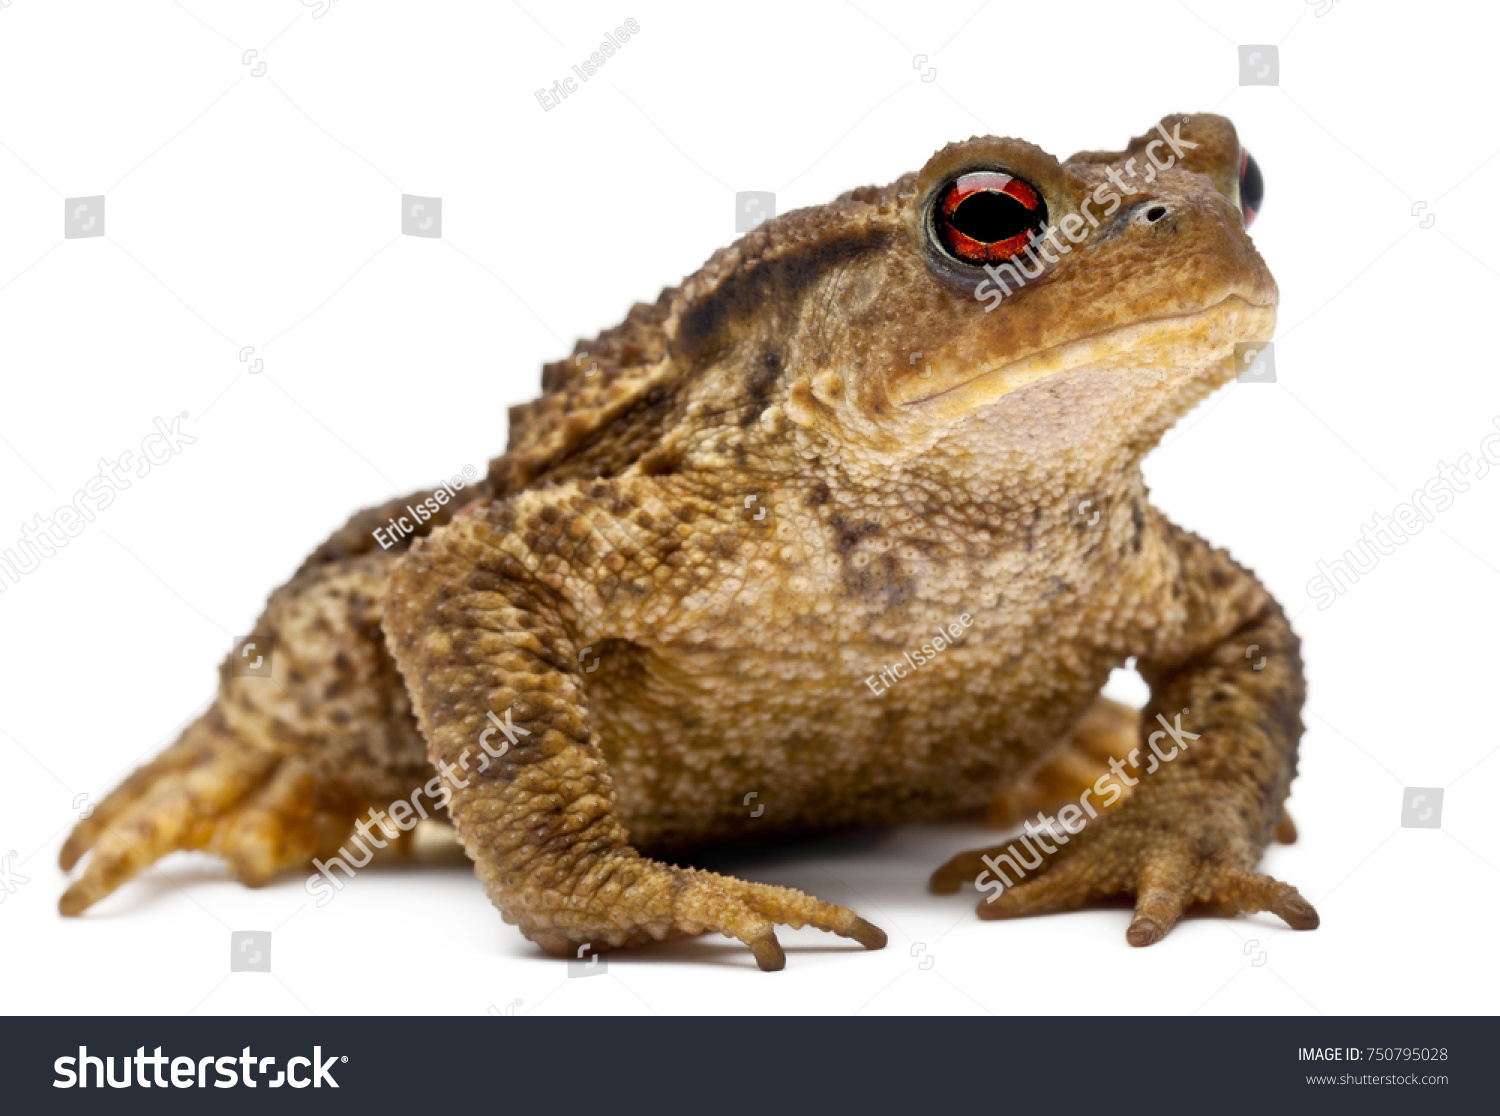 Common toad or European toad, Bufo bufo, in front of white background #750795028